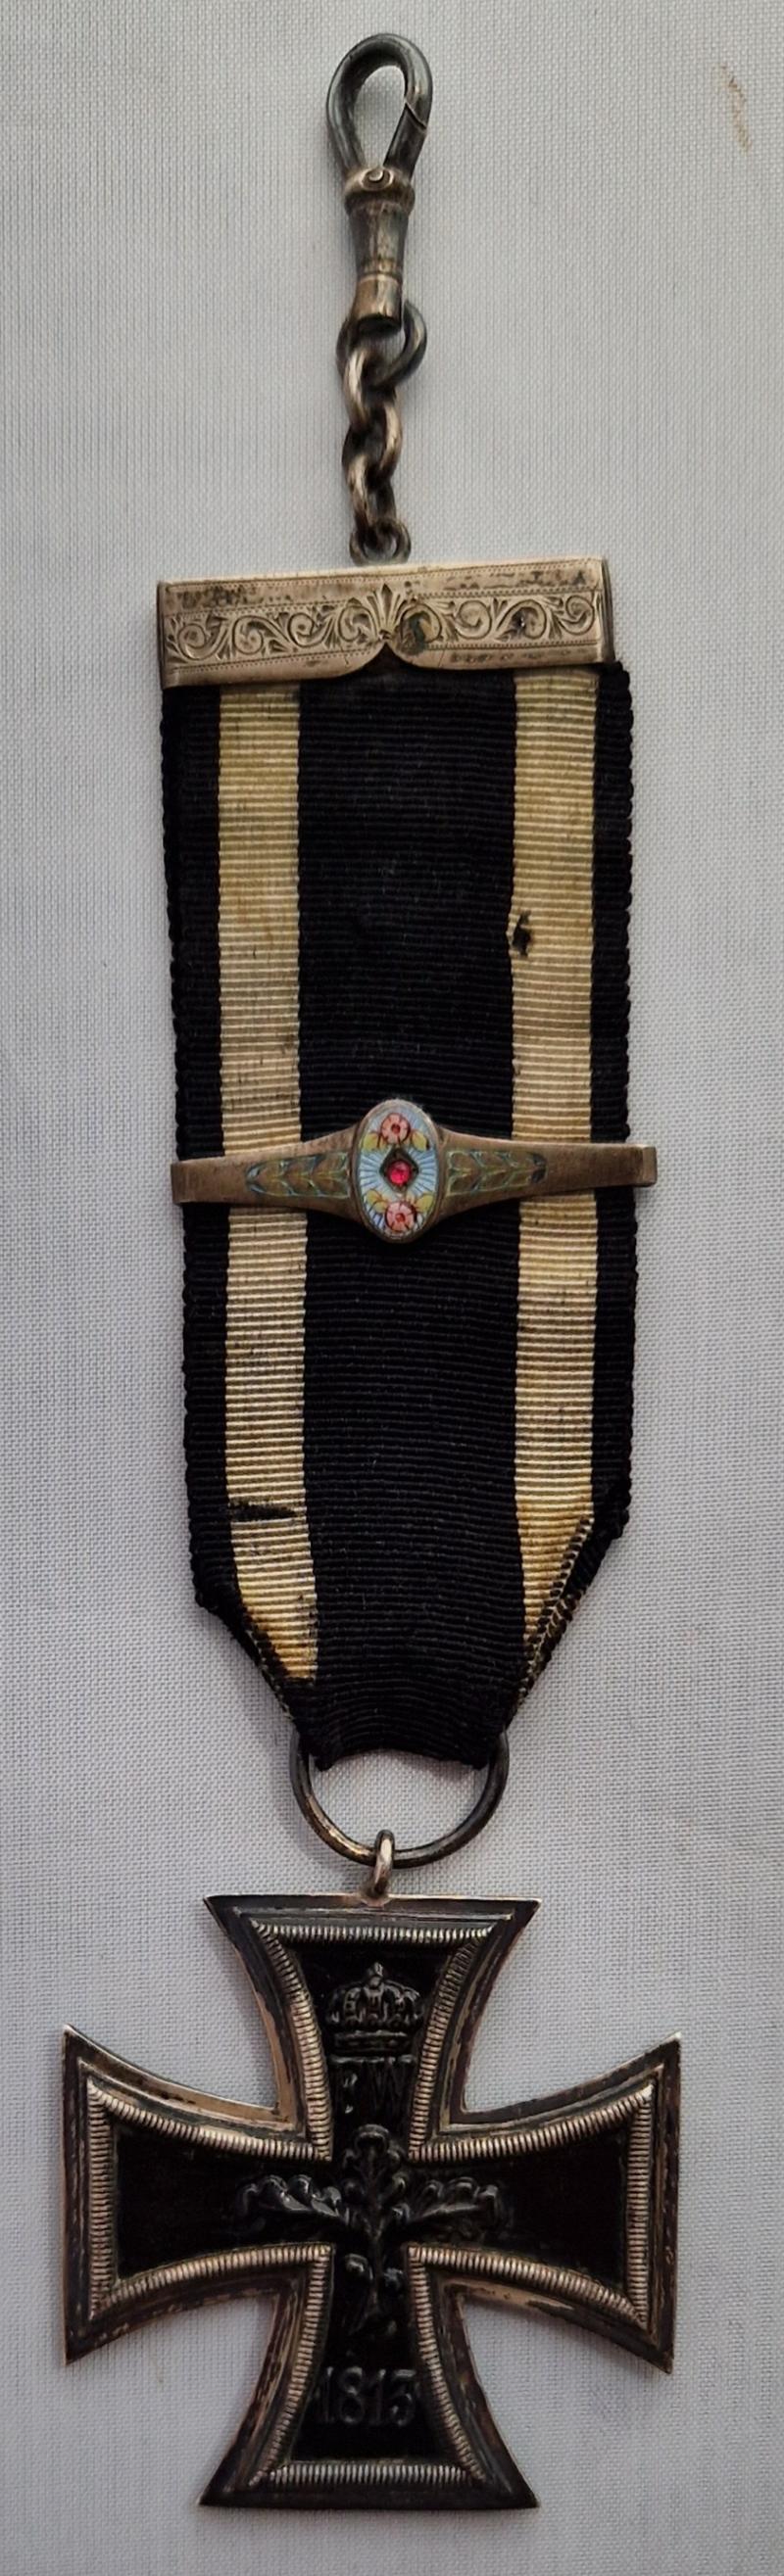 1914 Iron Cross Second Class converted to a watch fob by BH Mayer mm M with 800 silver and enamel fob bars.